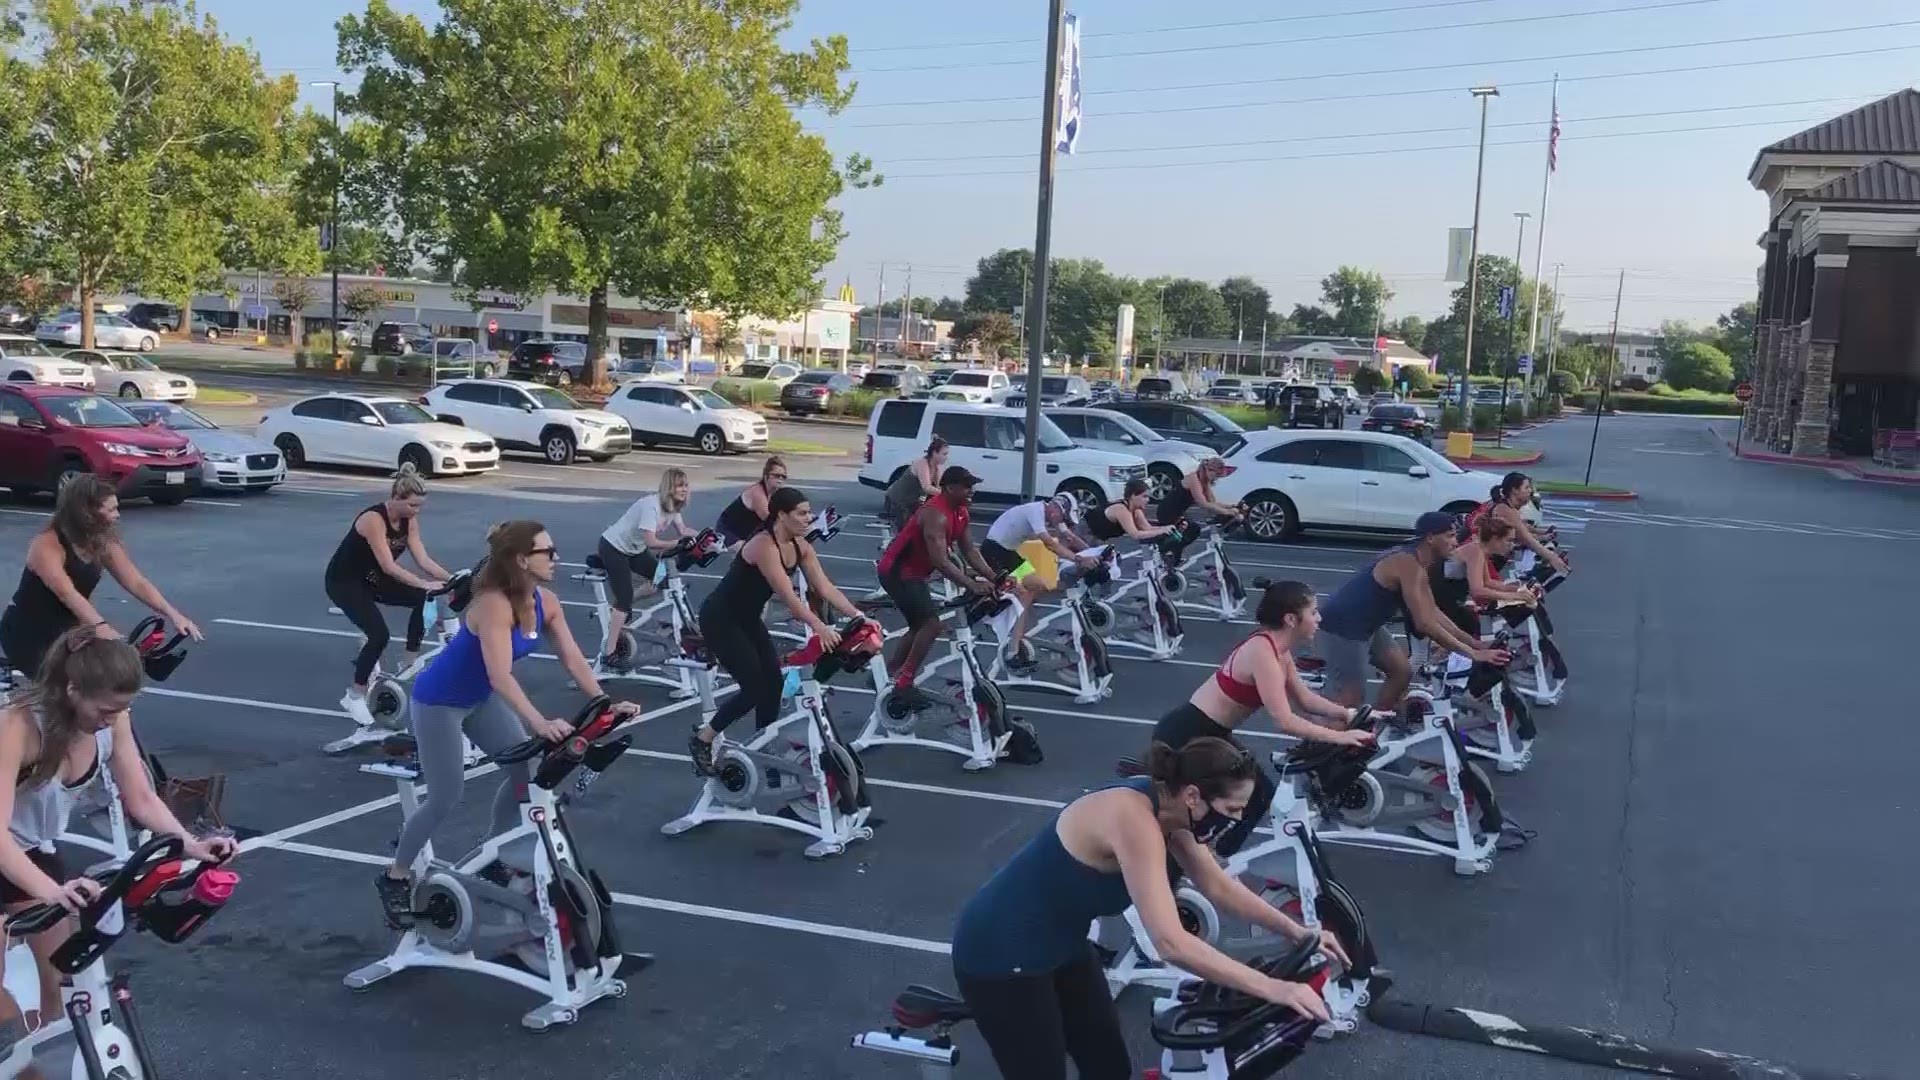 East Cobb fitness studio begins holding outdoor spin classes for its members